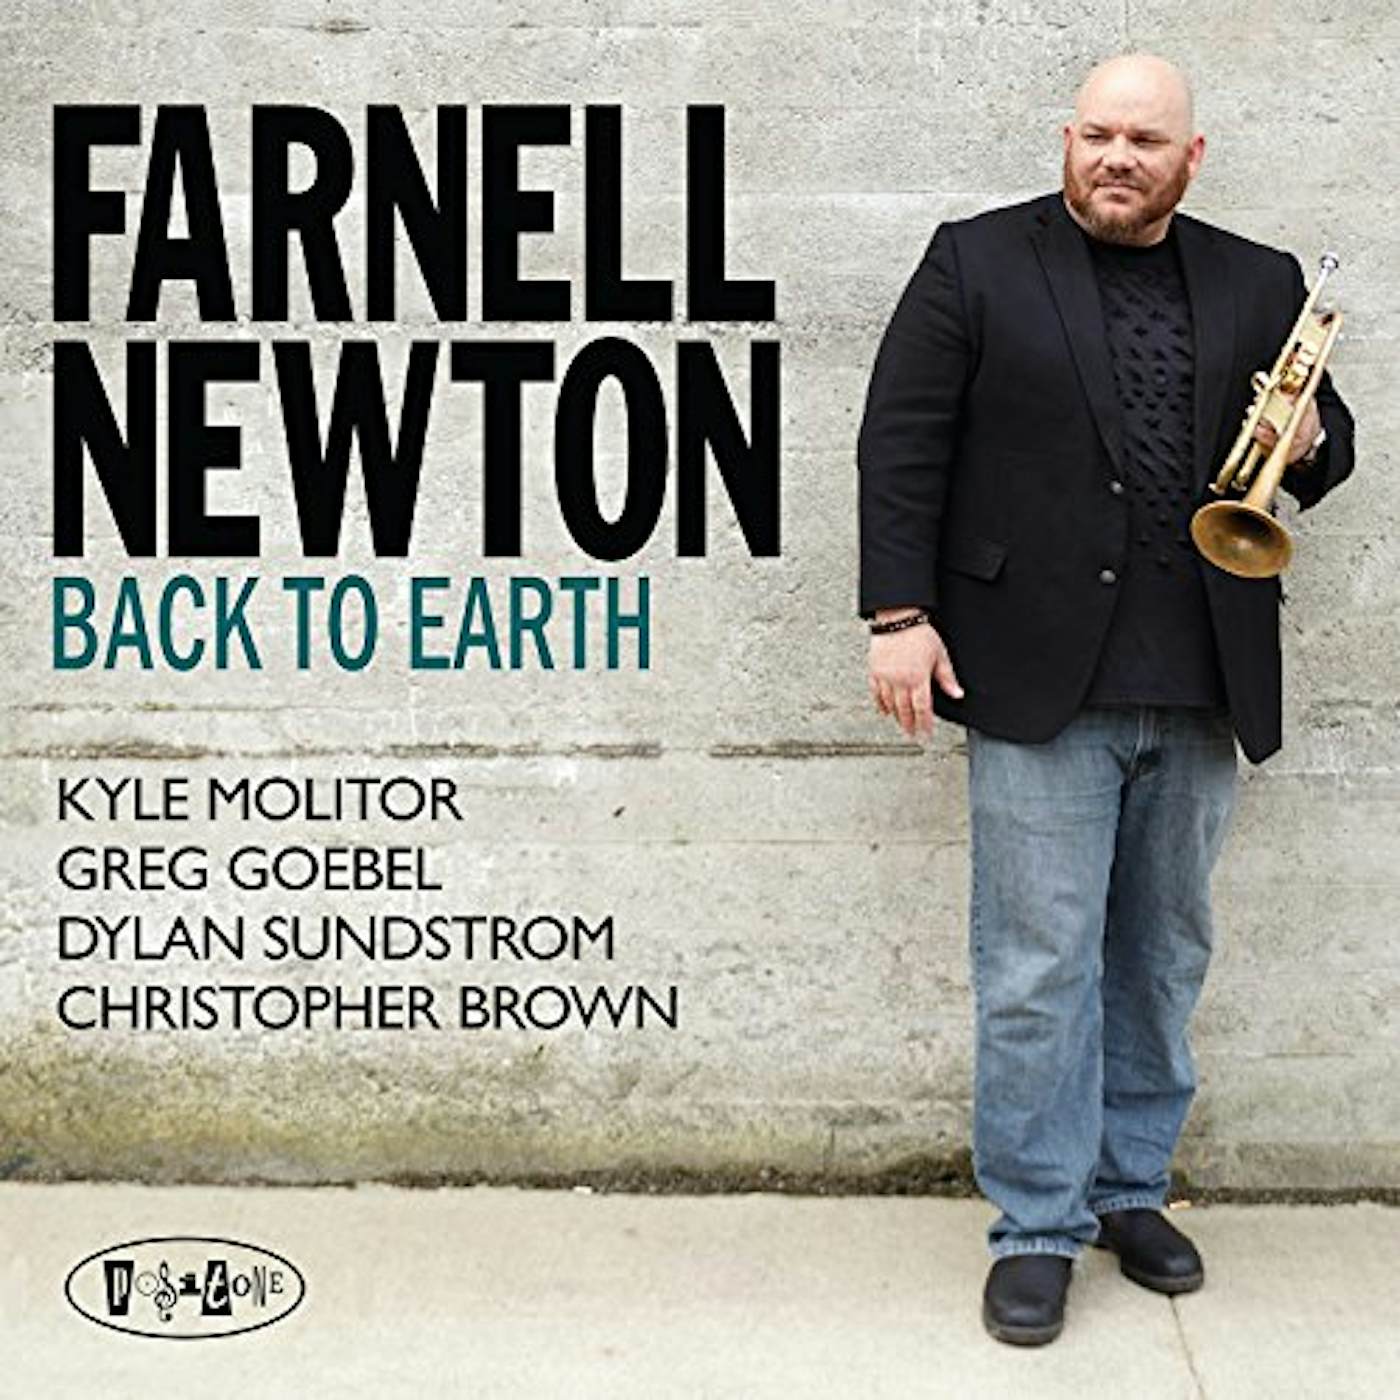 Farnell Newton BACK TO EARTH CD